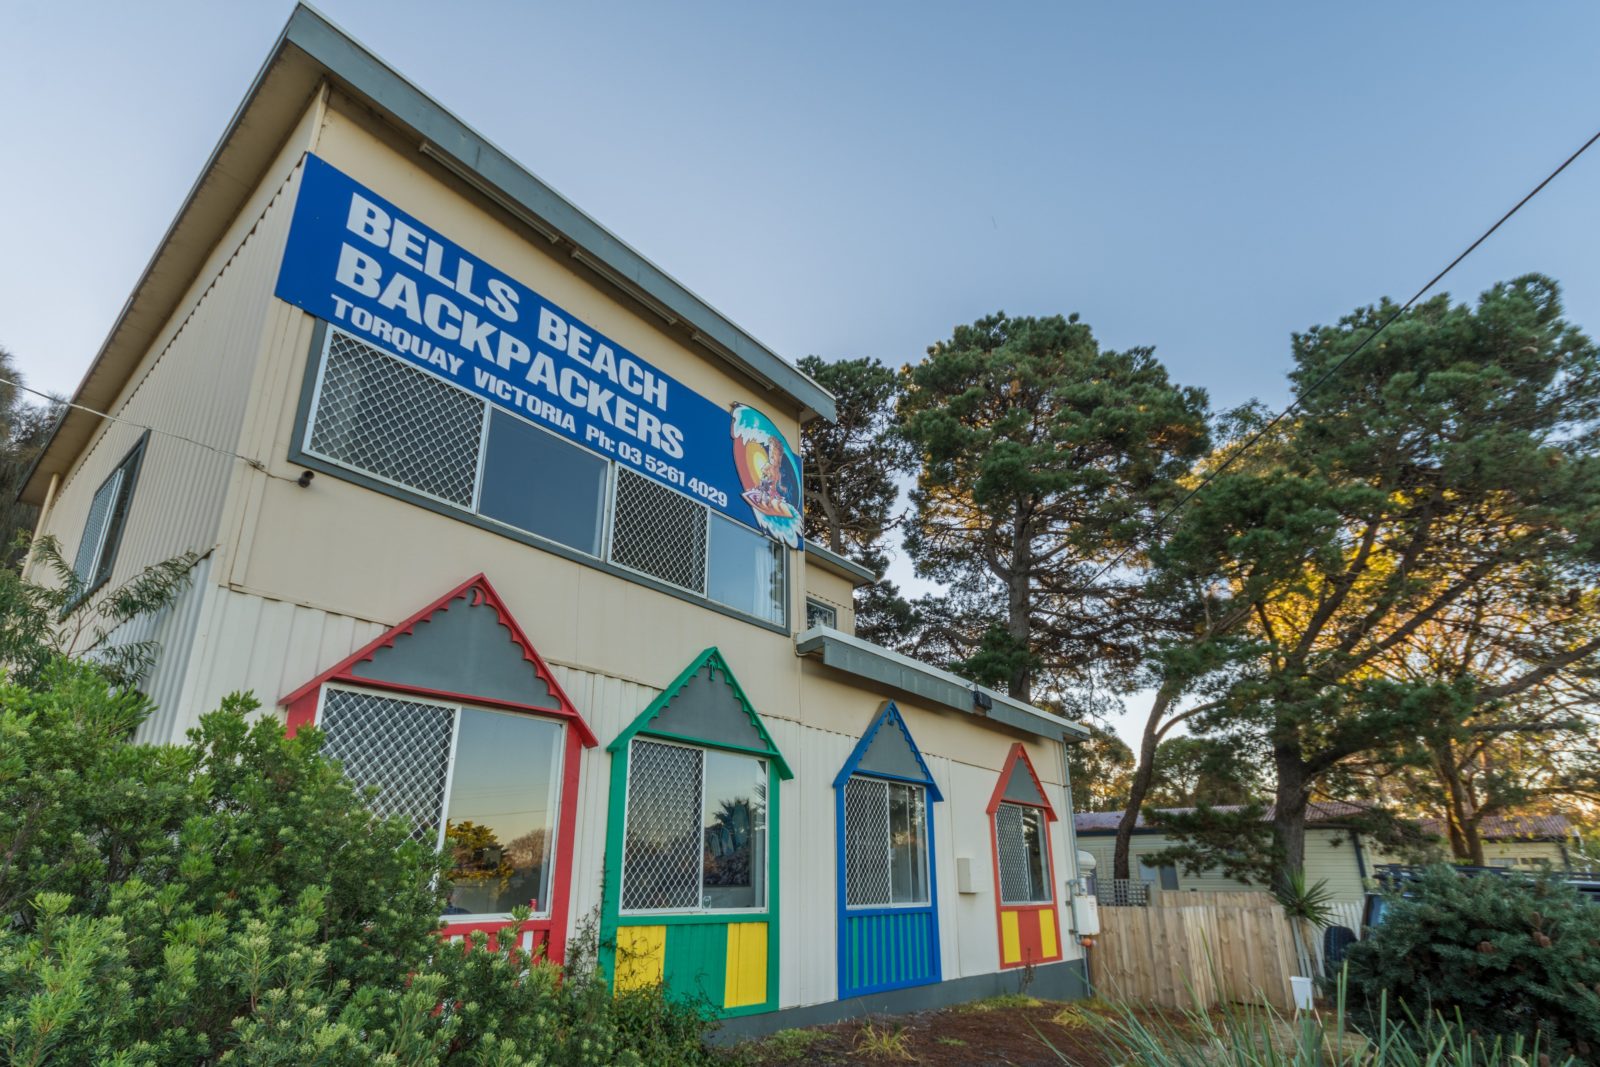 The coloured frames depict the Bathing boxes that were once located on Torquay Front Beach.